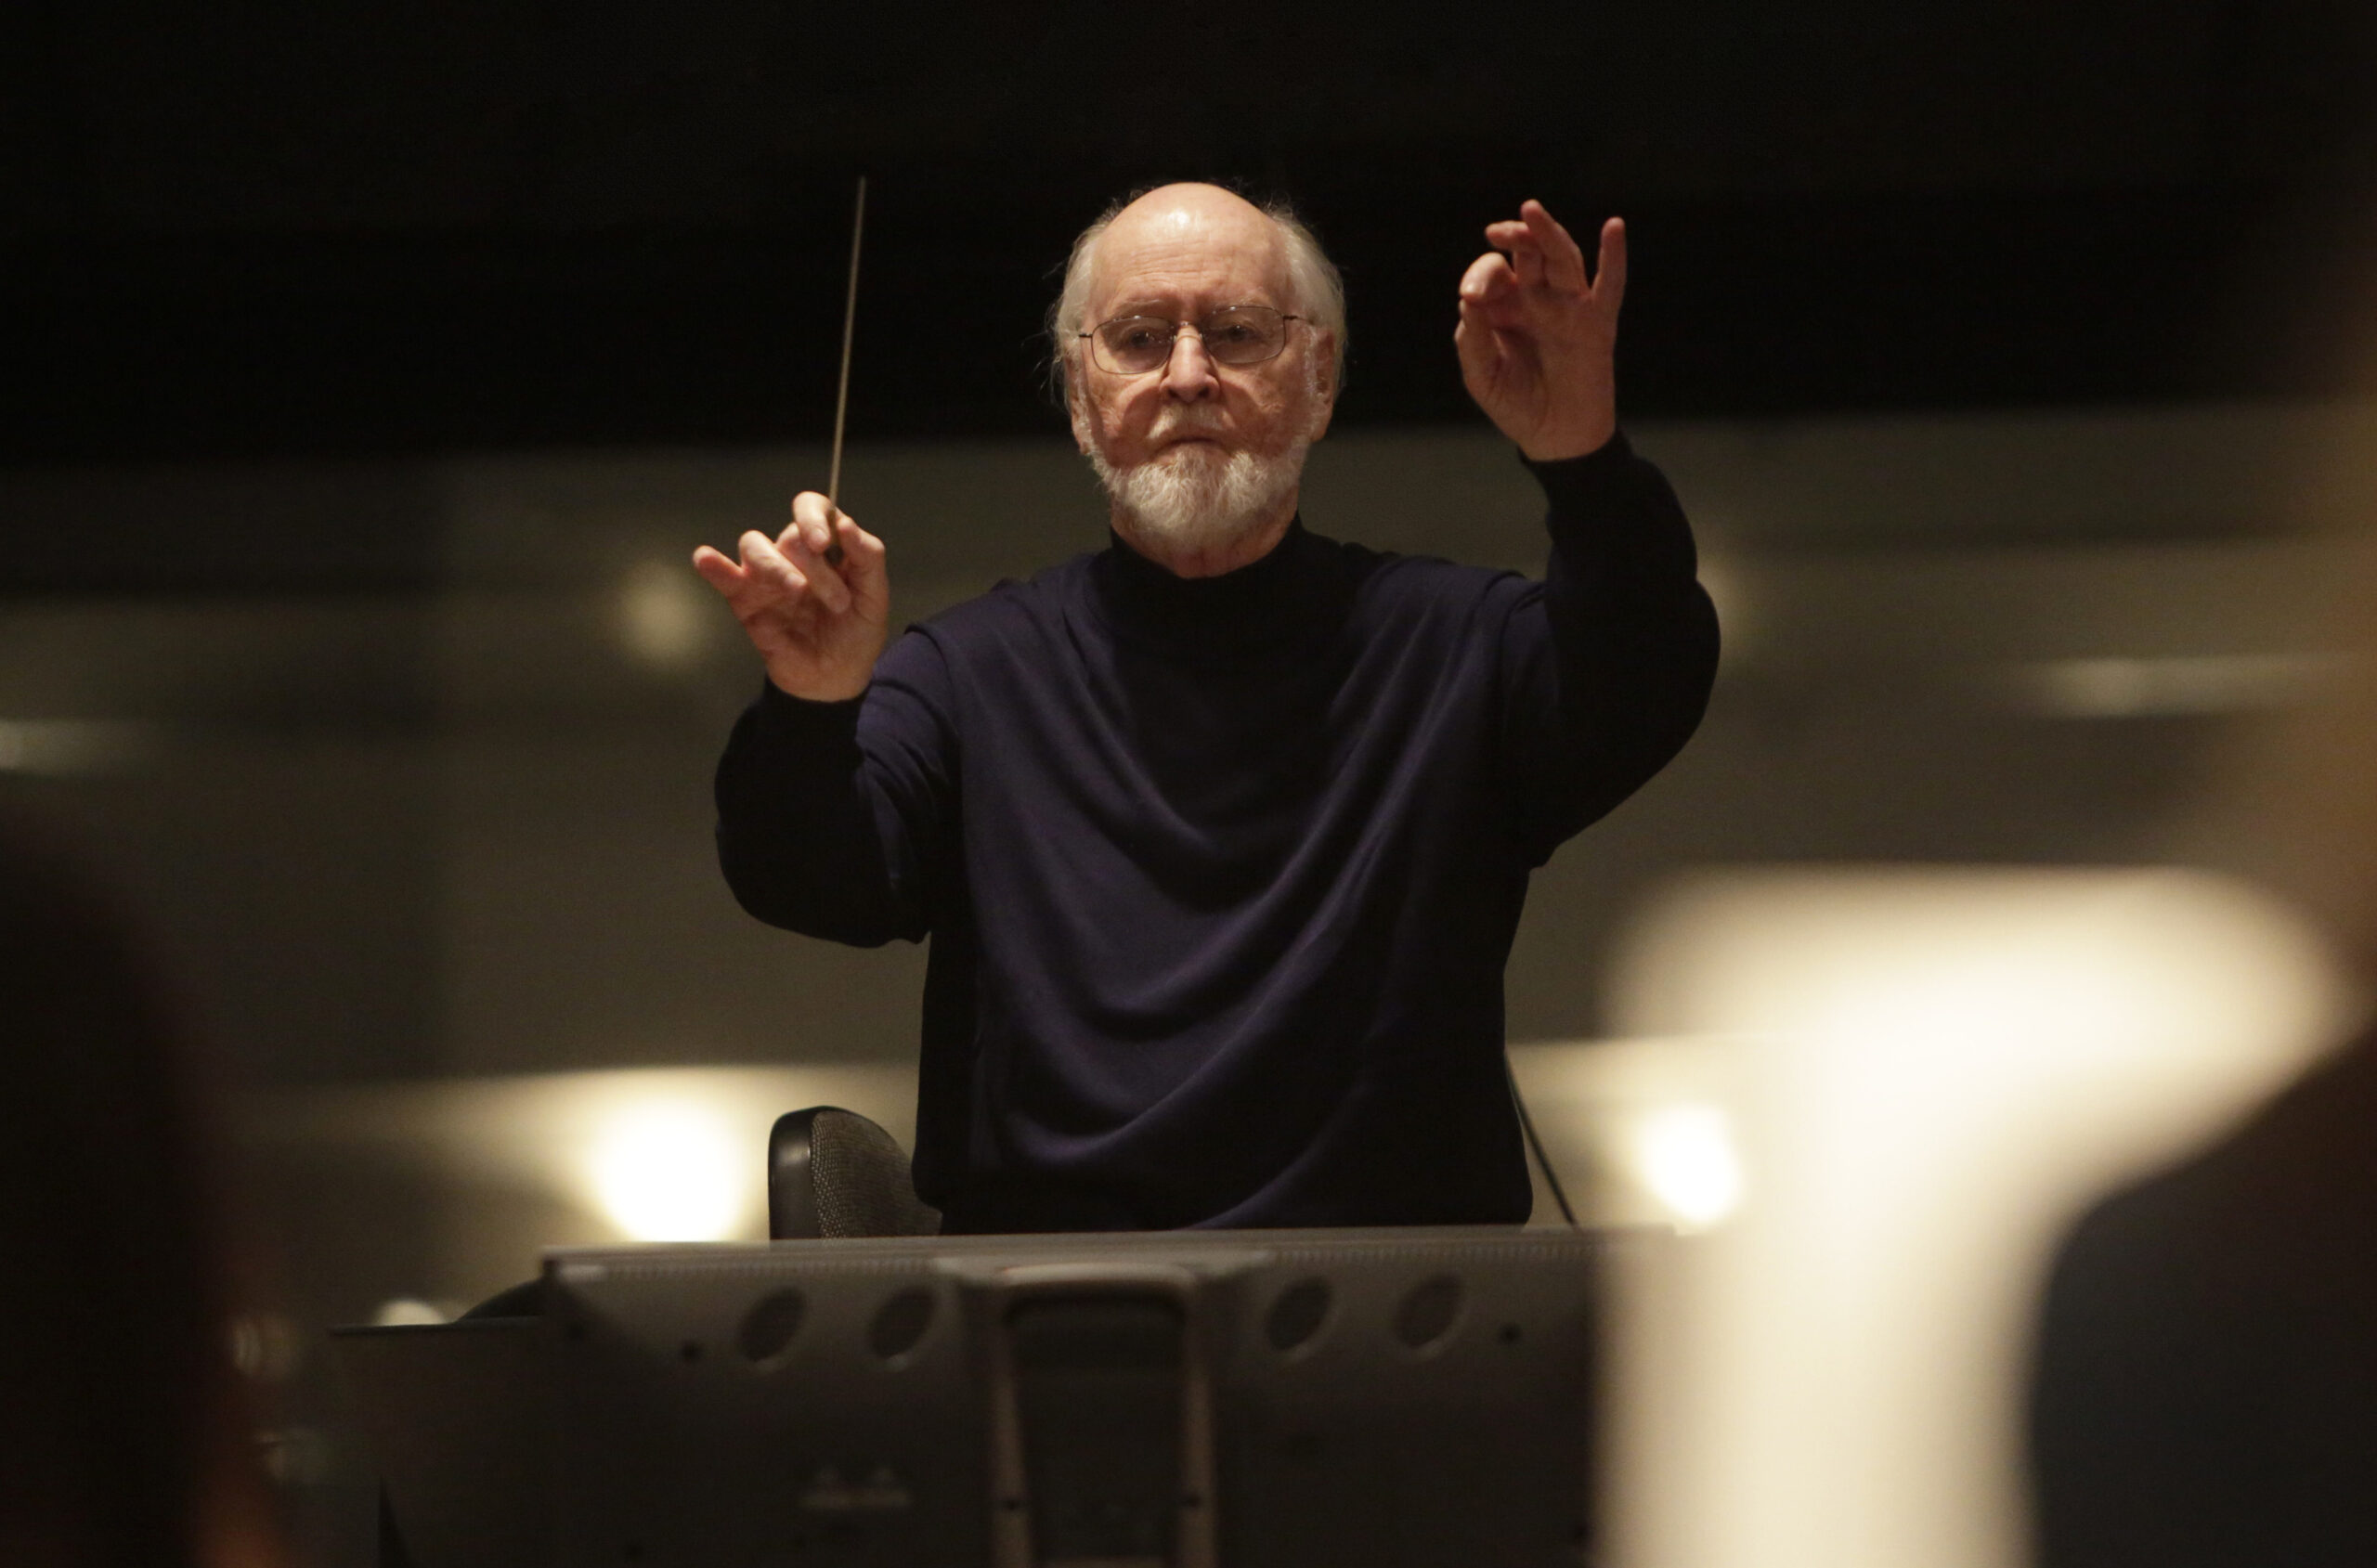 This 2017 photo released by Lucasfilm Ltd. shows John Williams, a five-time Oscar-winning composer. Williams, 90, is devoting himself to composing concert music, including a piano concerto he’s writing for Emanuel X. This spring, he and cellist Yo-Yo Ma released the album “A Gathering of Friends,” recorded with the New York Philharmonic. (Jamie Trueblood/Lucasfilm Ltd. via AP)